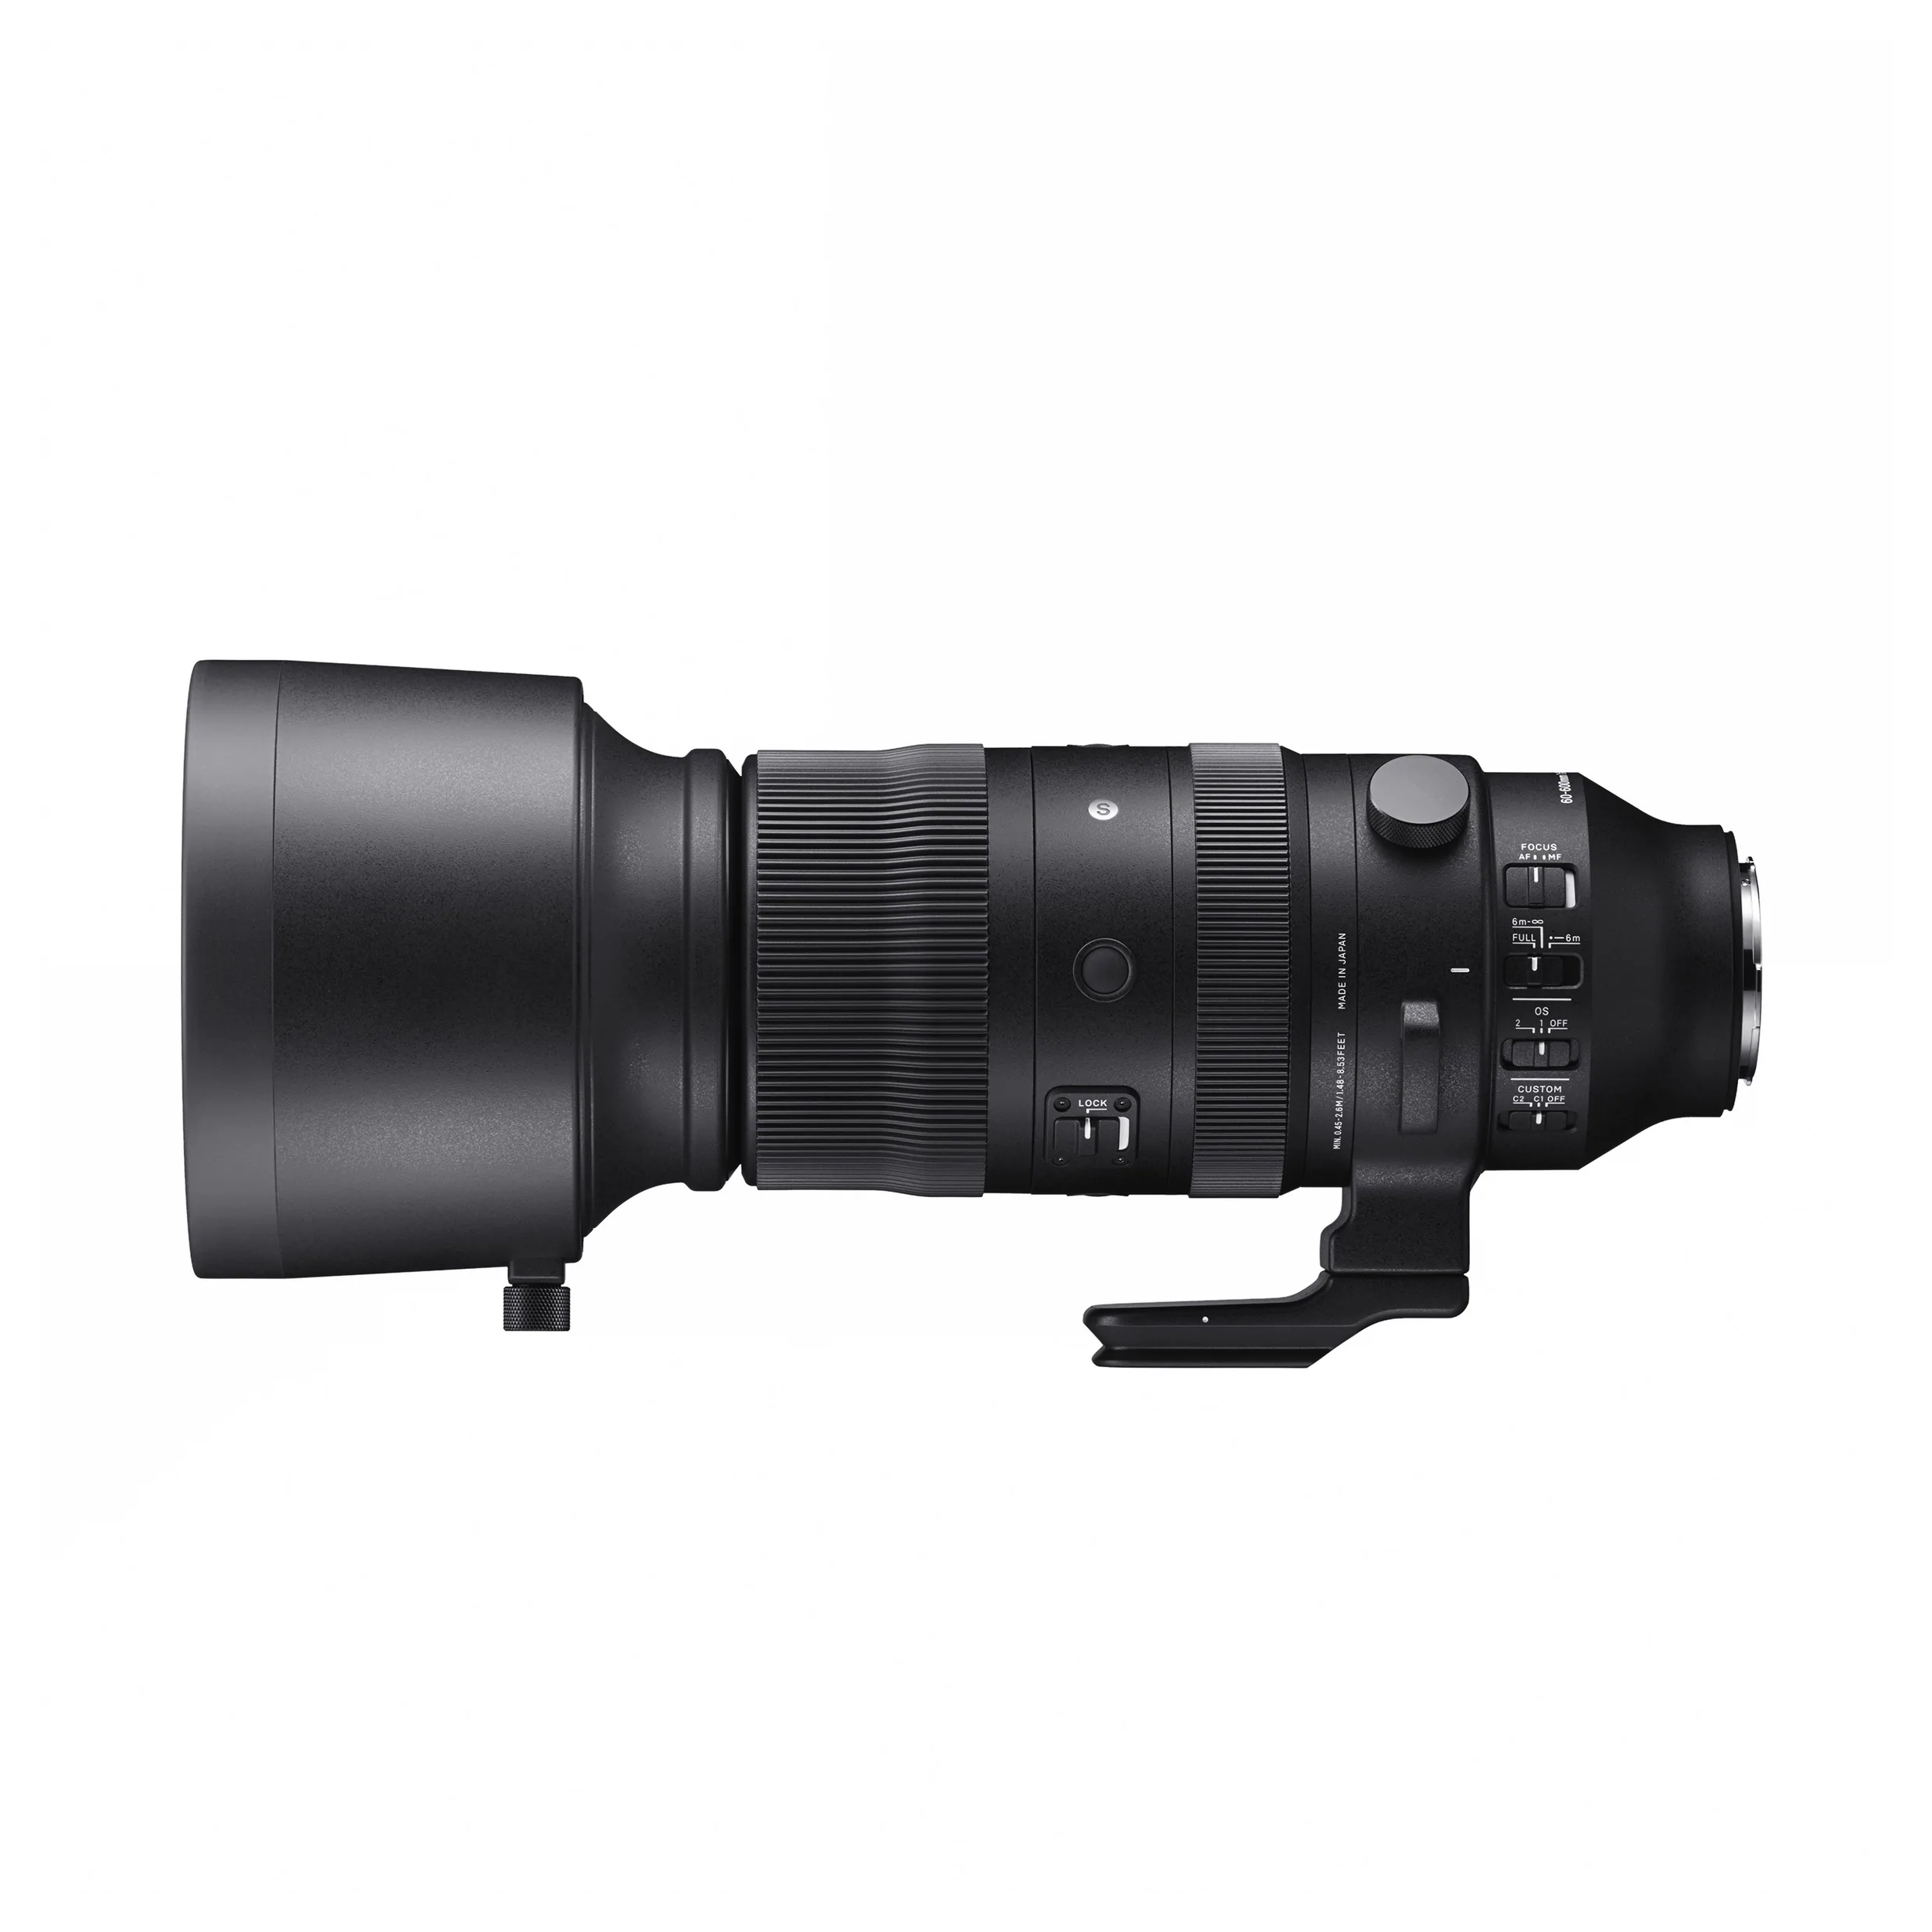 Sigma 60-600mm F4.5-6.3 DG DN OS Sports Lens for Sony E Mount